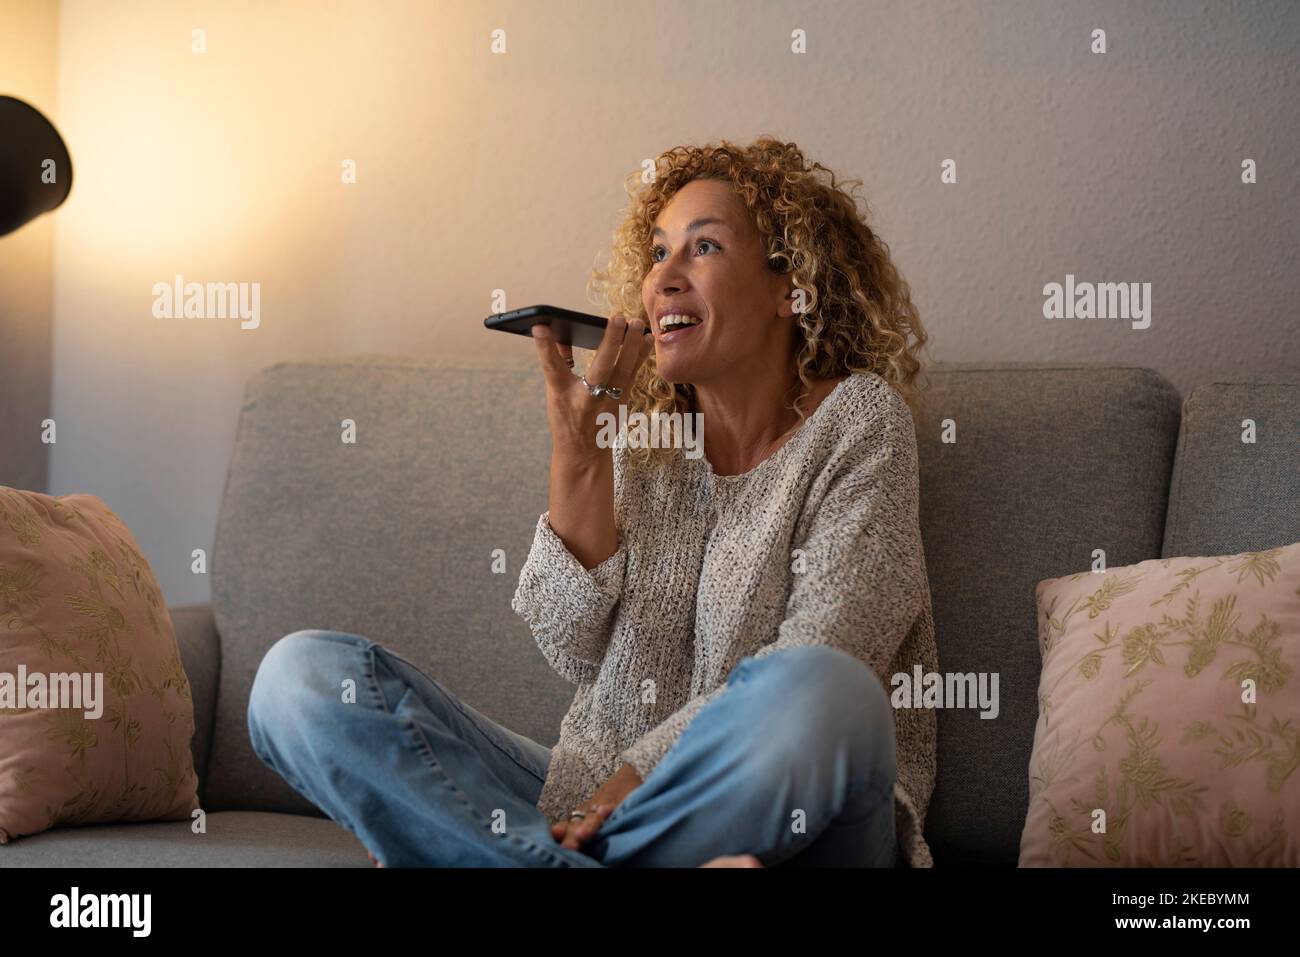 Excited woman speaking at the phone during cellular call at home sitting on the sofa. Indoor leisure activity and use of modern device. Female people enjoying voice connection with friends. Smartphone Stock Photo